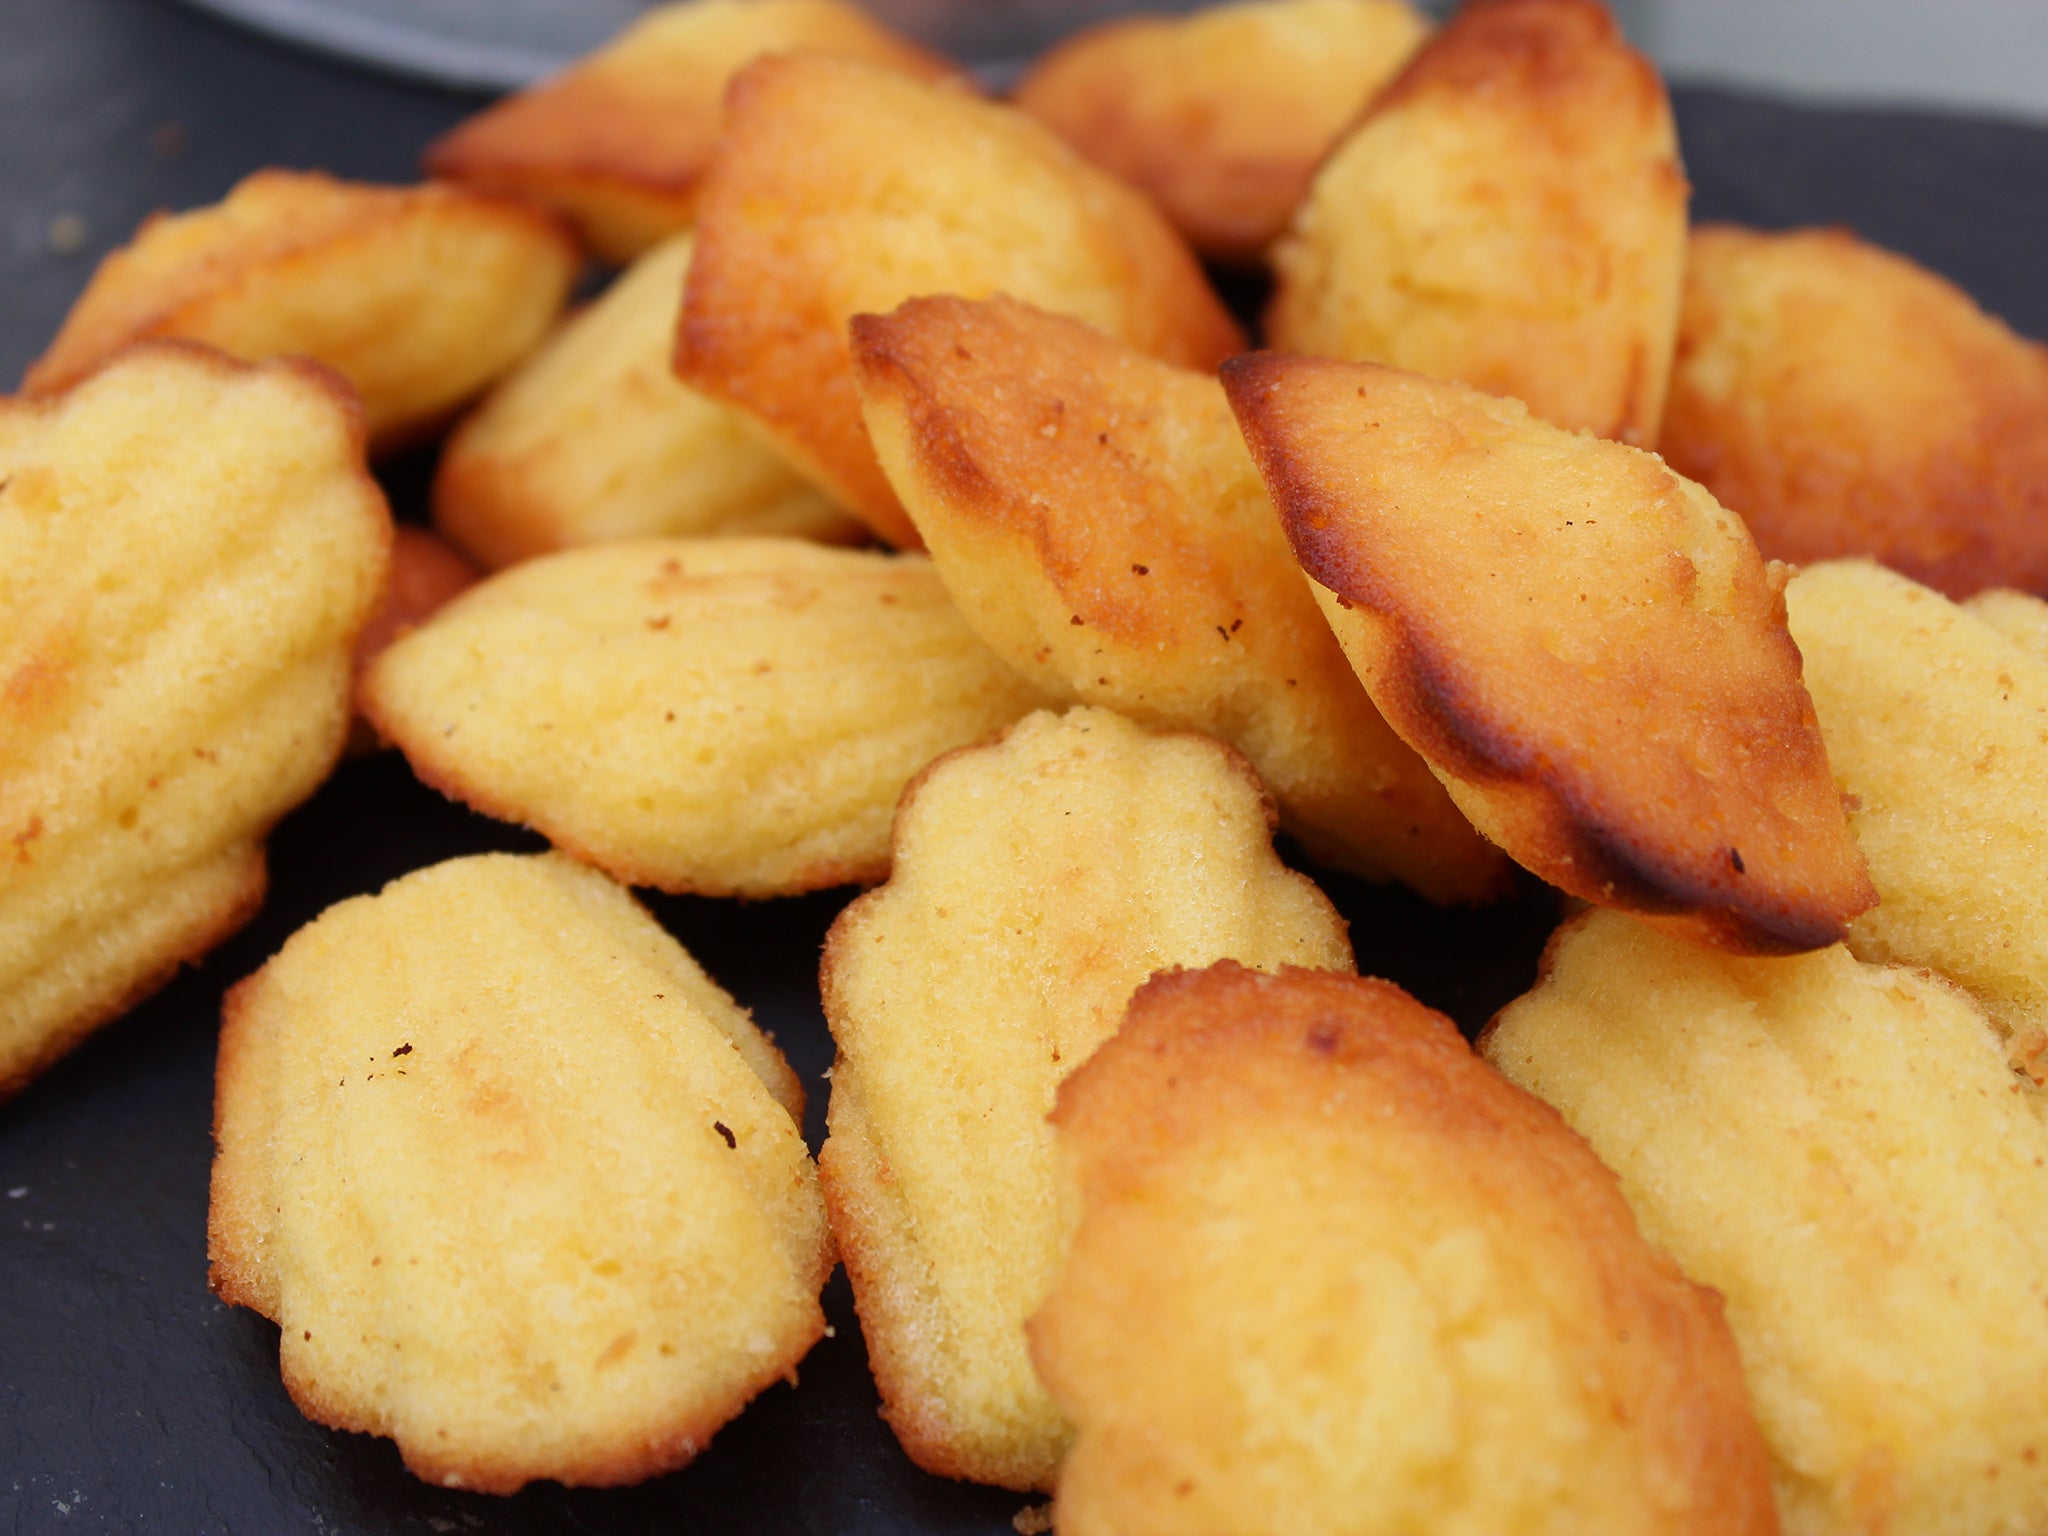 Who doesn’t love madeleines?